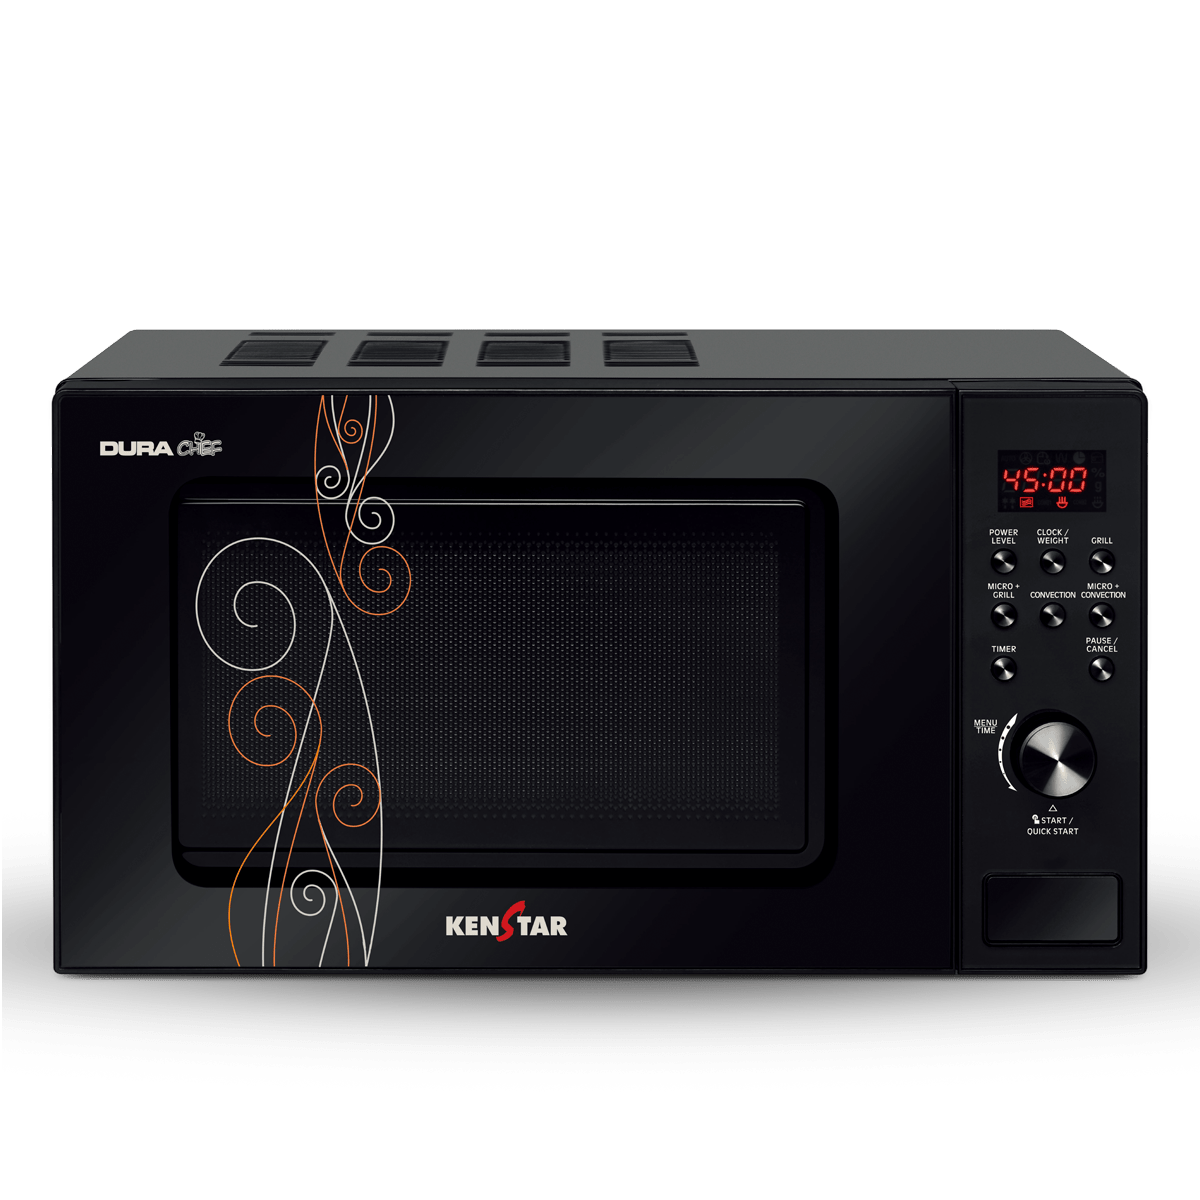 Oven microwave